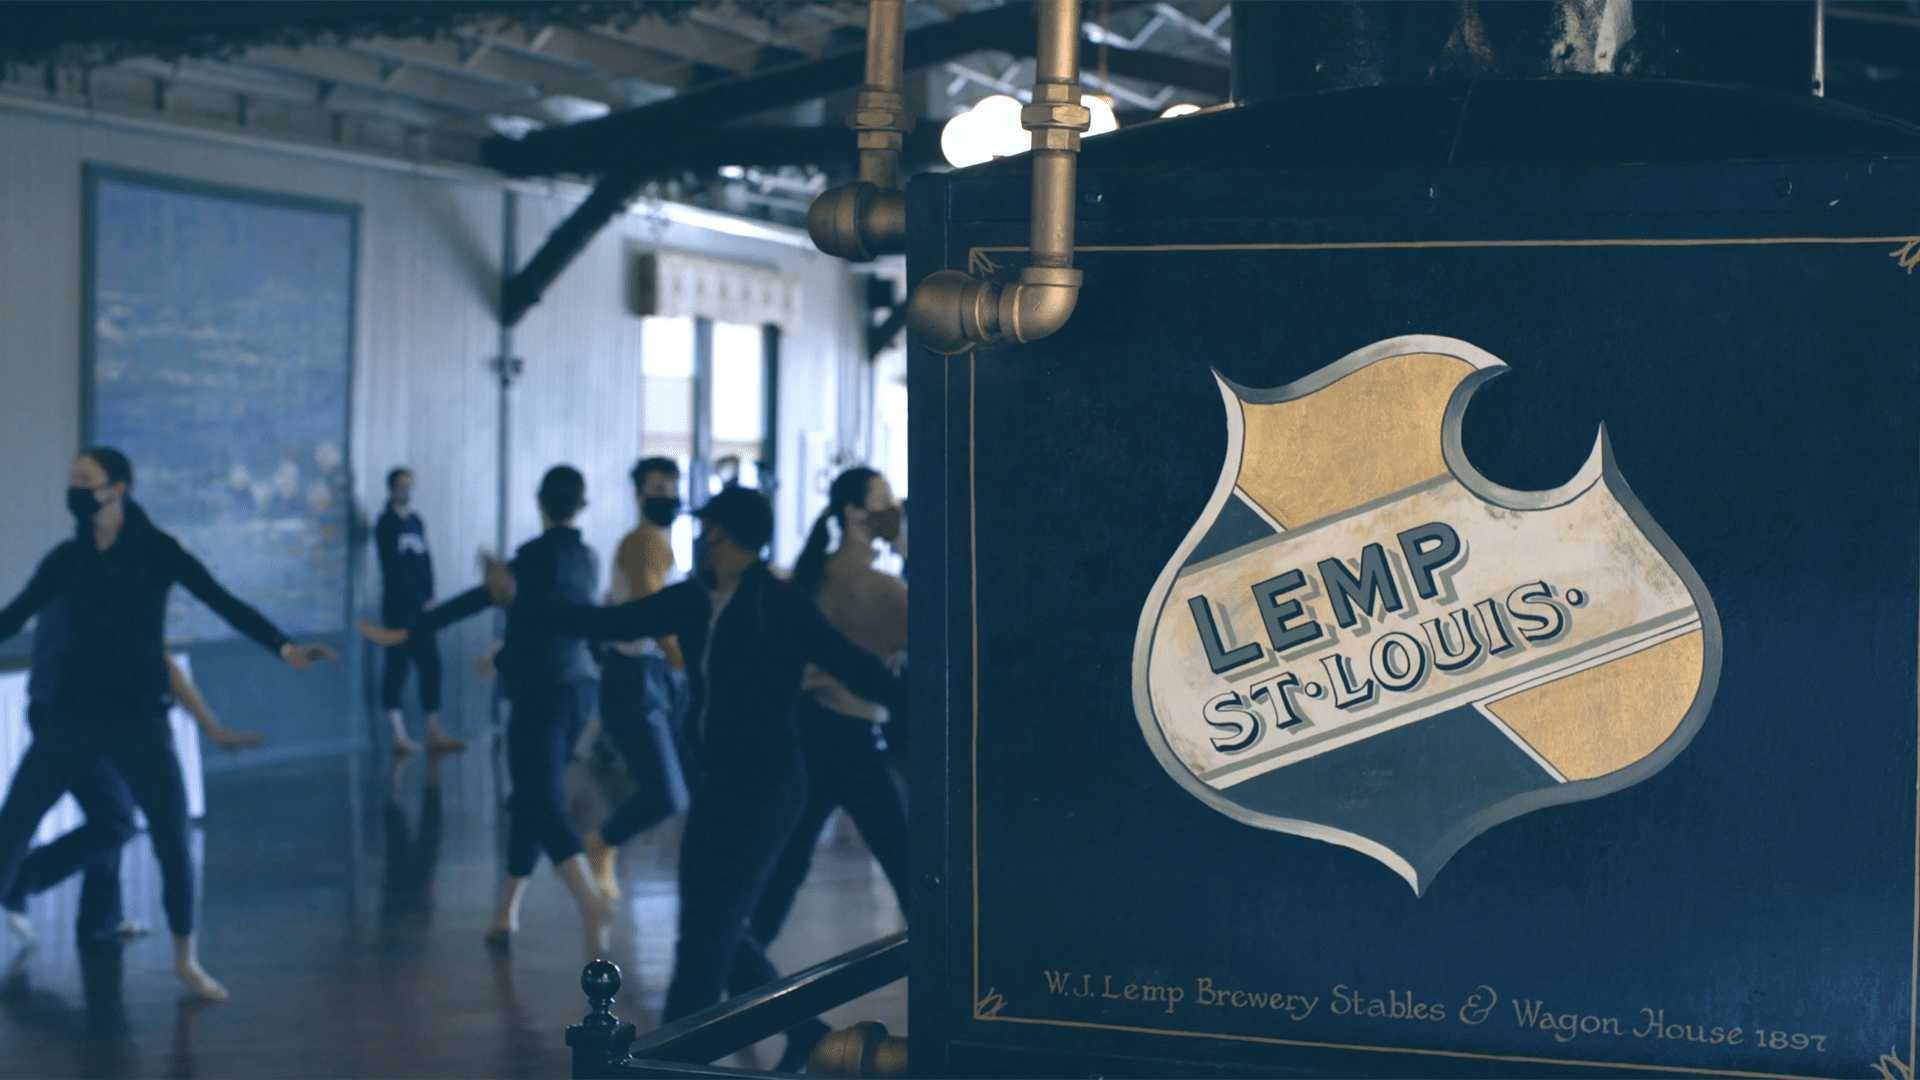 The Big Muddy Dance Company rehearsing in the Lemp Brewery